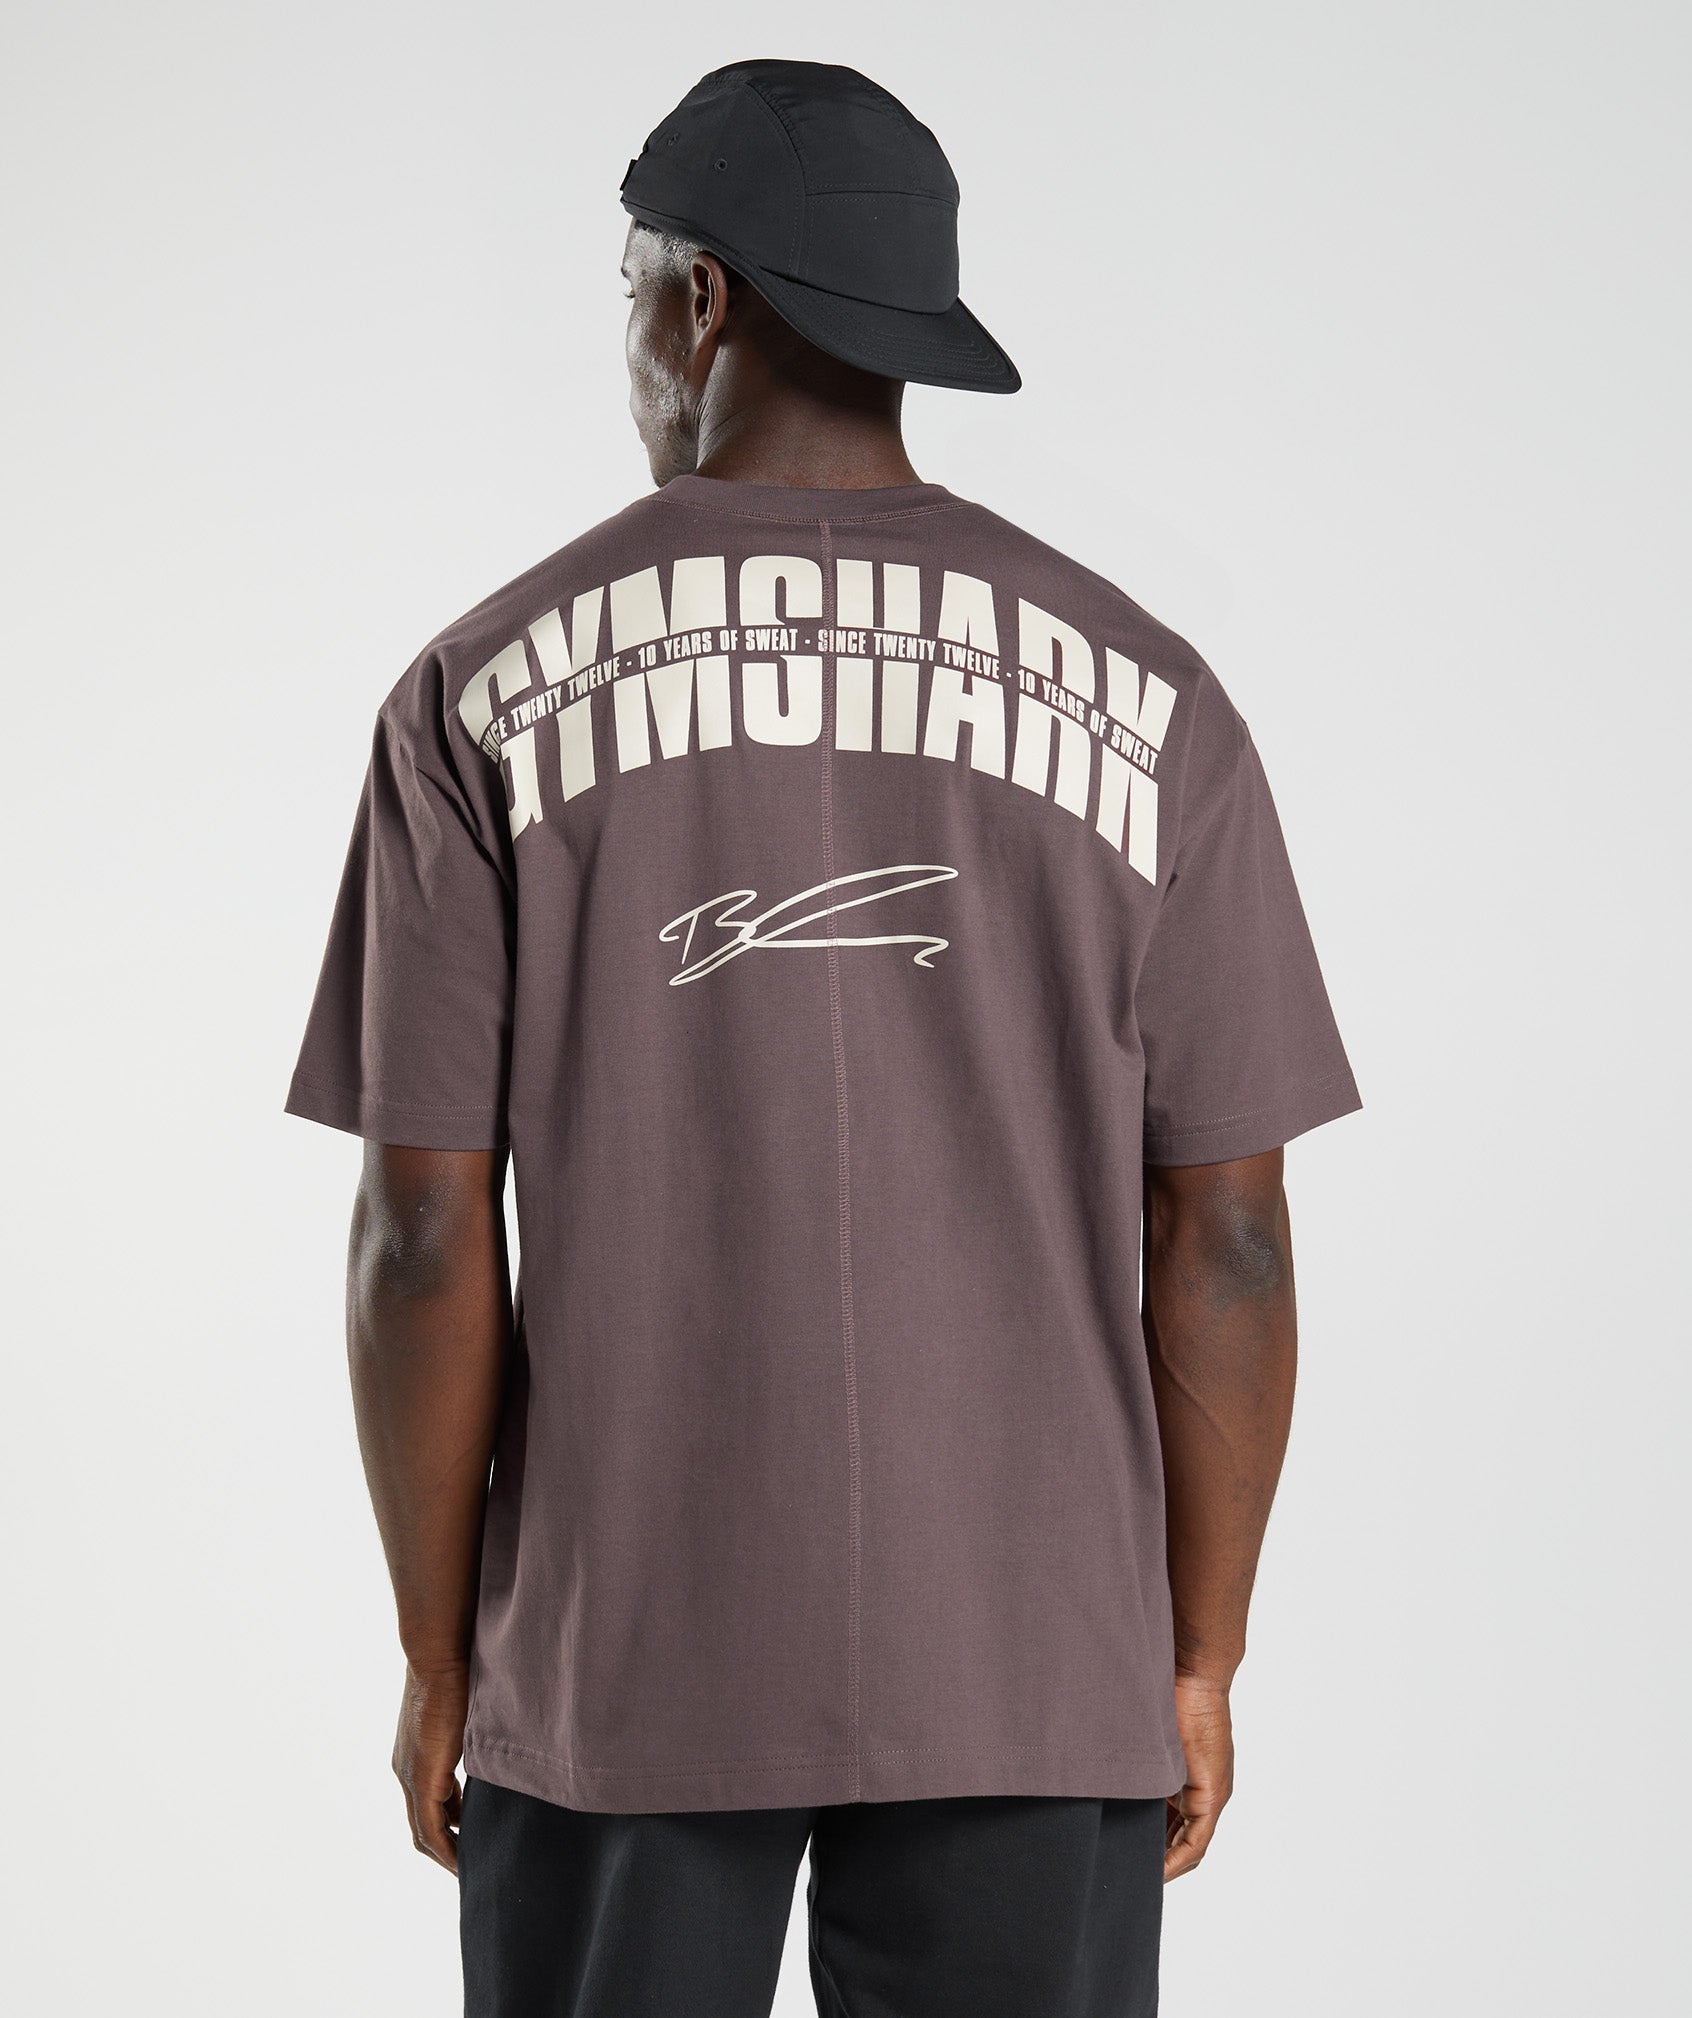 GS10 Year Oversized T-Shirt in Chocolate Brown - view 2